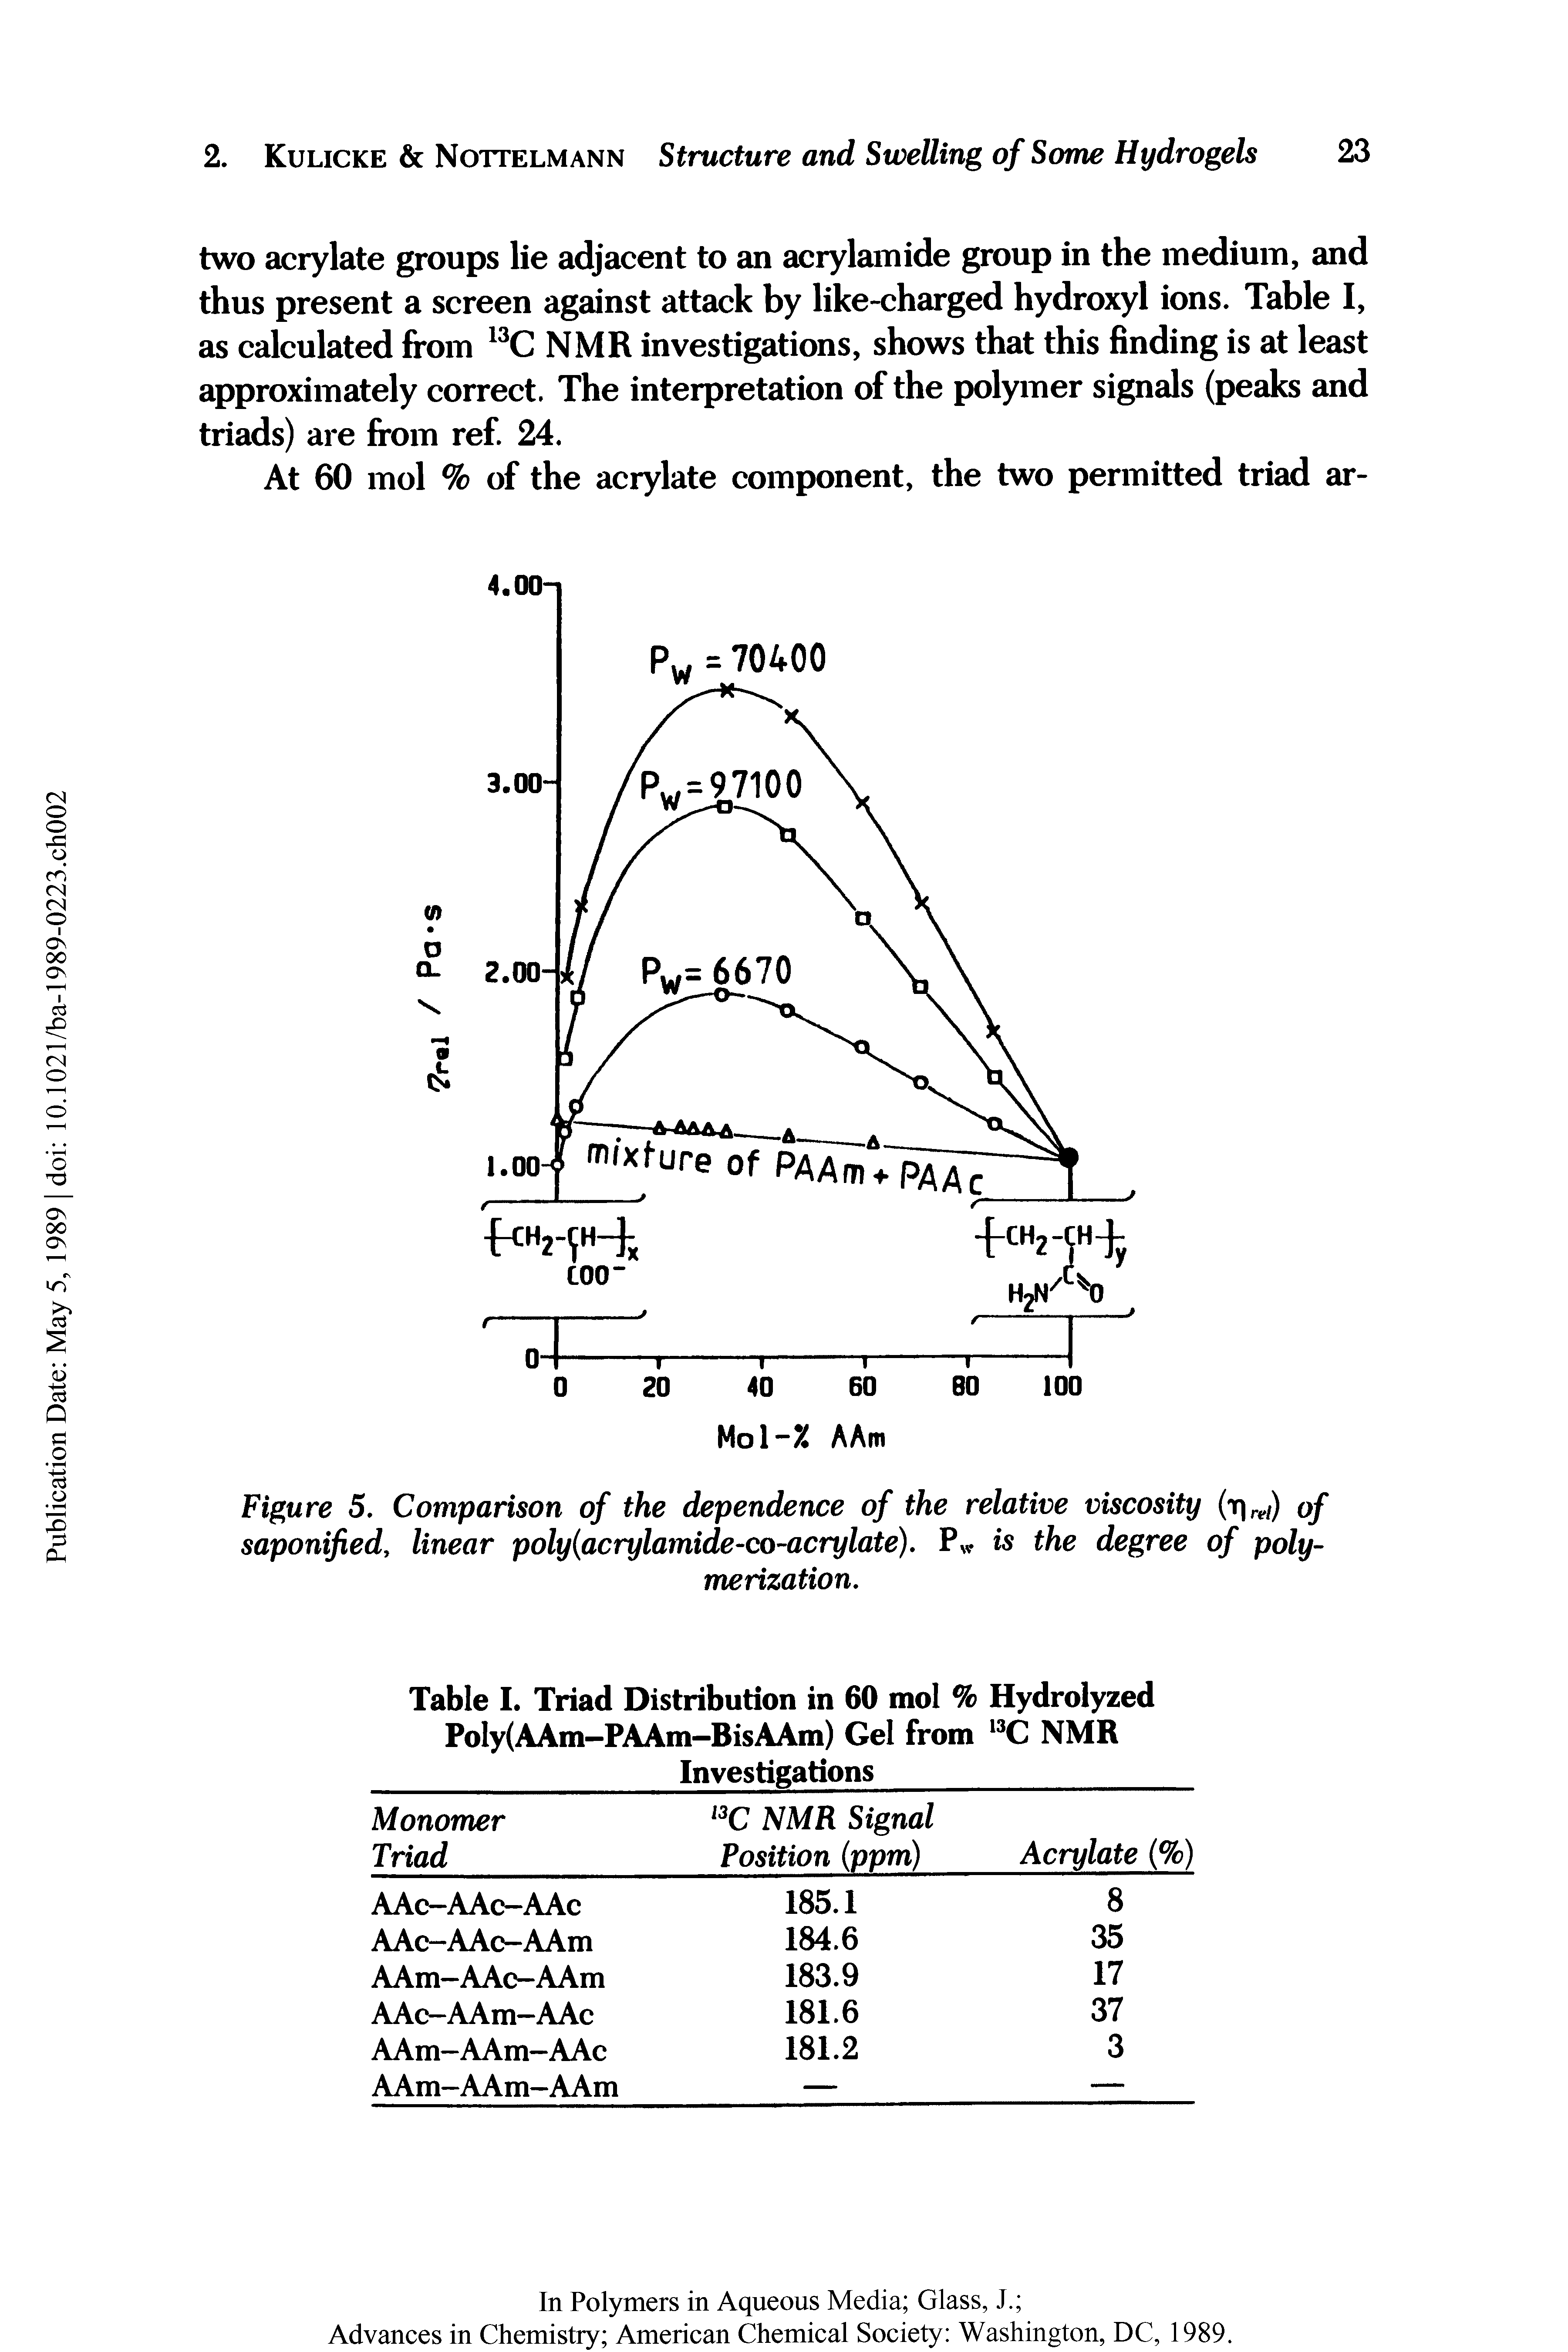 Figure 5, Comparison of the dependence of the relative viscosity (T]rei) of saponified, linear poly(acrylamide-co acrylate). Pw is the degree of polymerization.